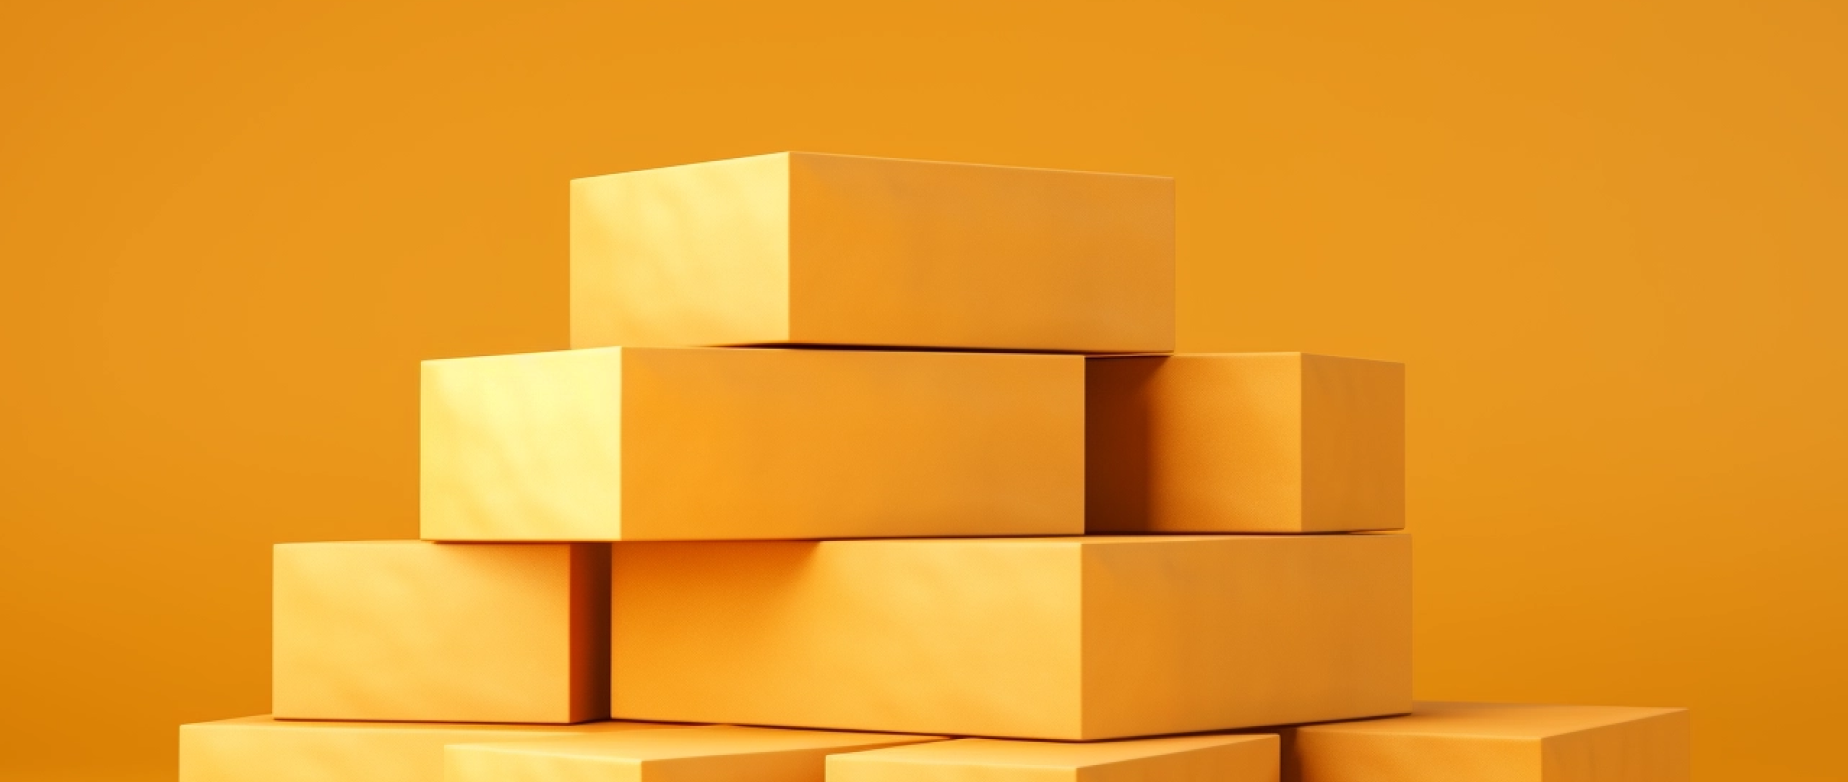 Boxes stacked in front of a dark orange background.